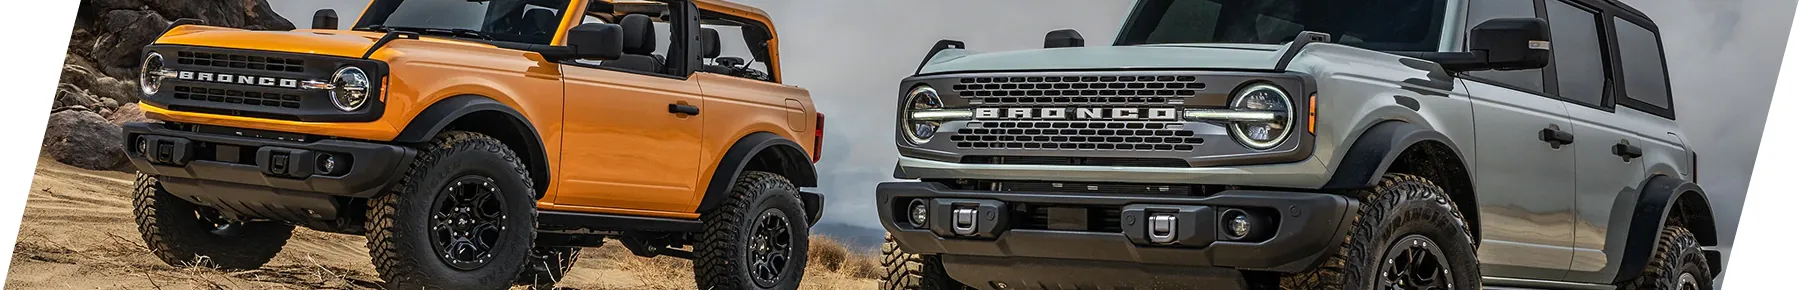 2021-2022 Ford Bronco Performance Parts Accessories